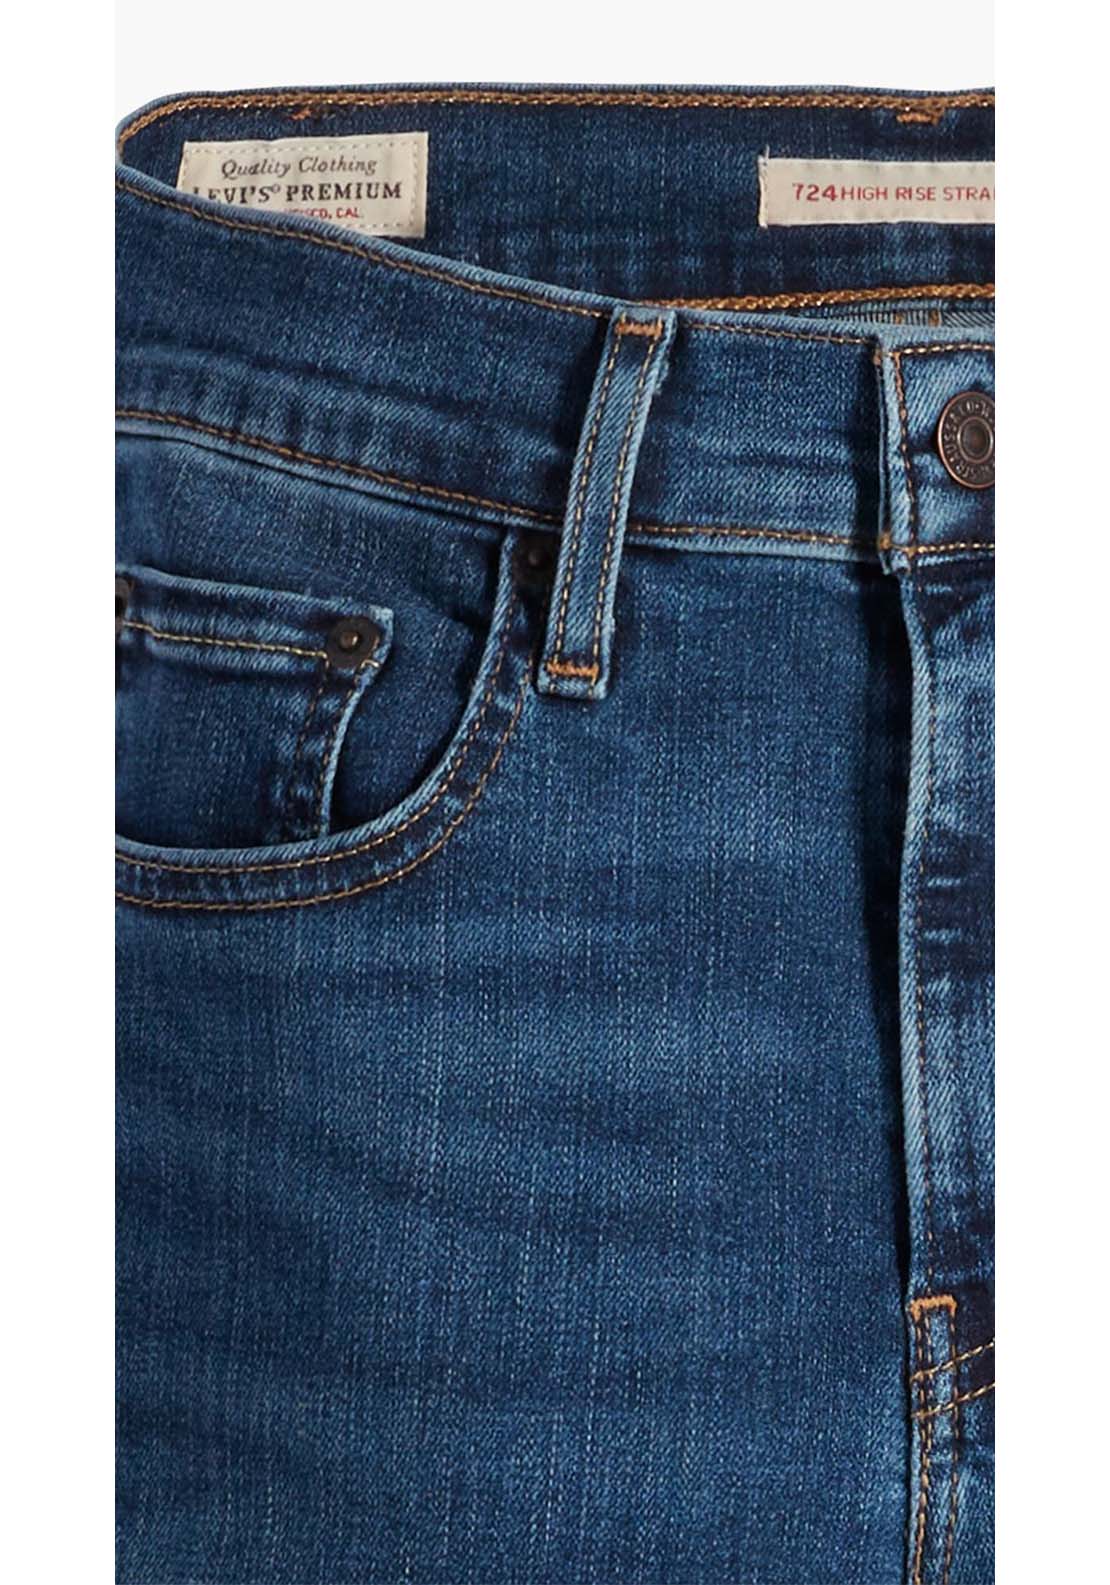 Levis 724 High Rise Straight 8 Shaws Department Stores